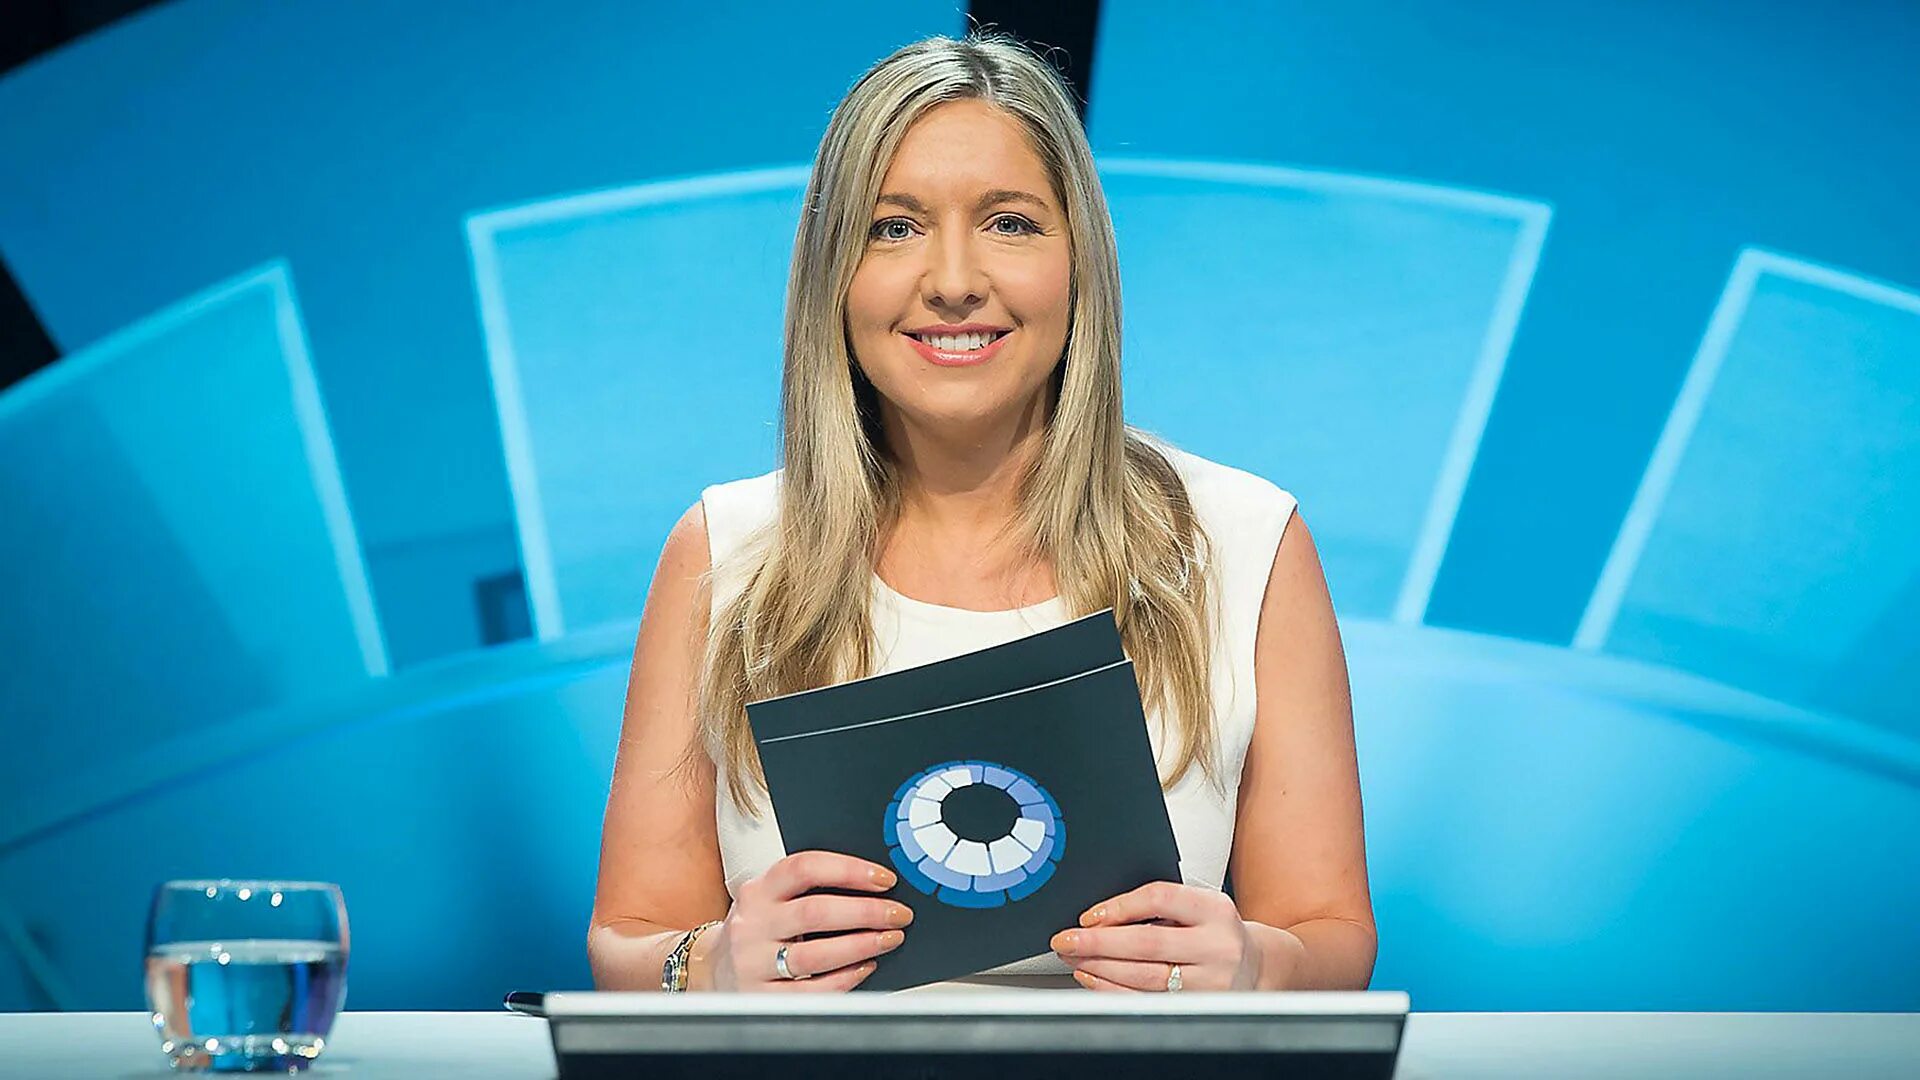 Connect series. Victoria Coren Mitchell. Only connect. Only connect телепередача.